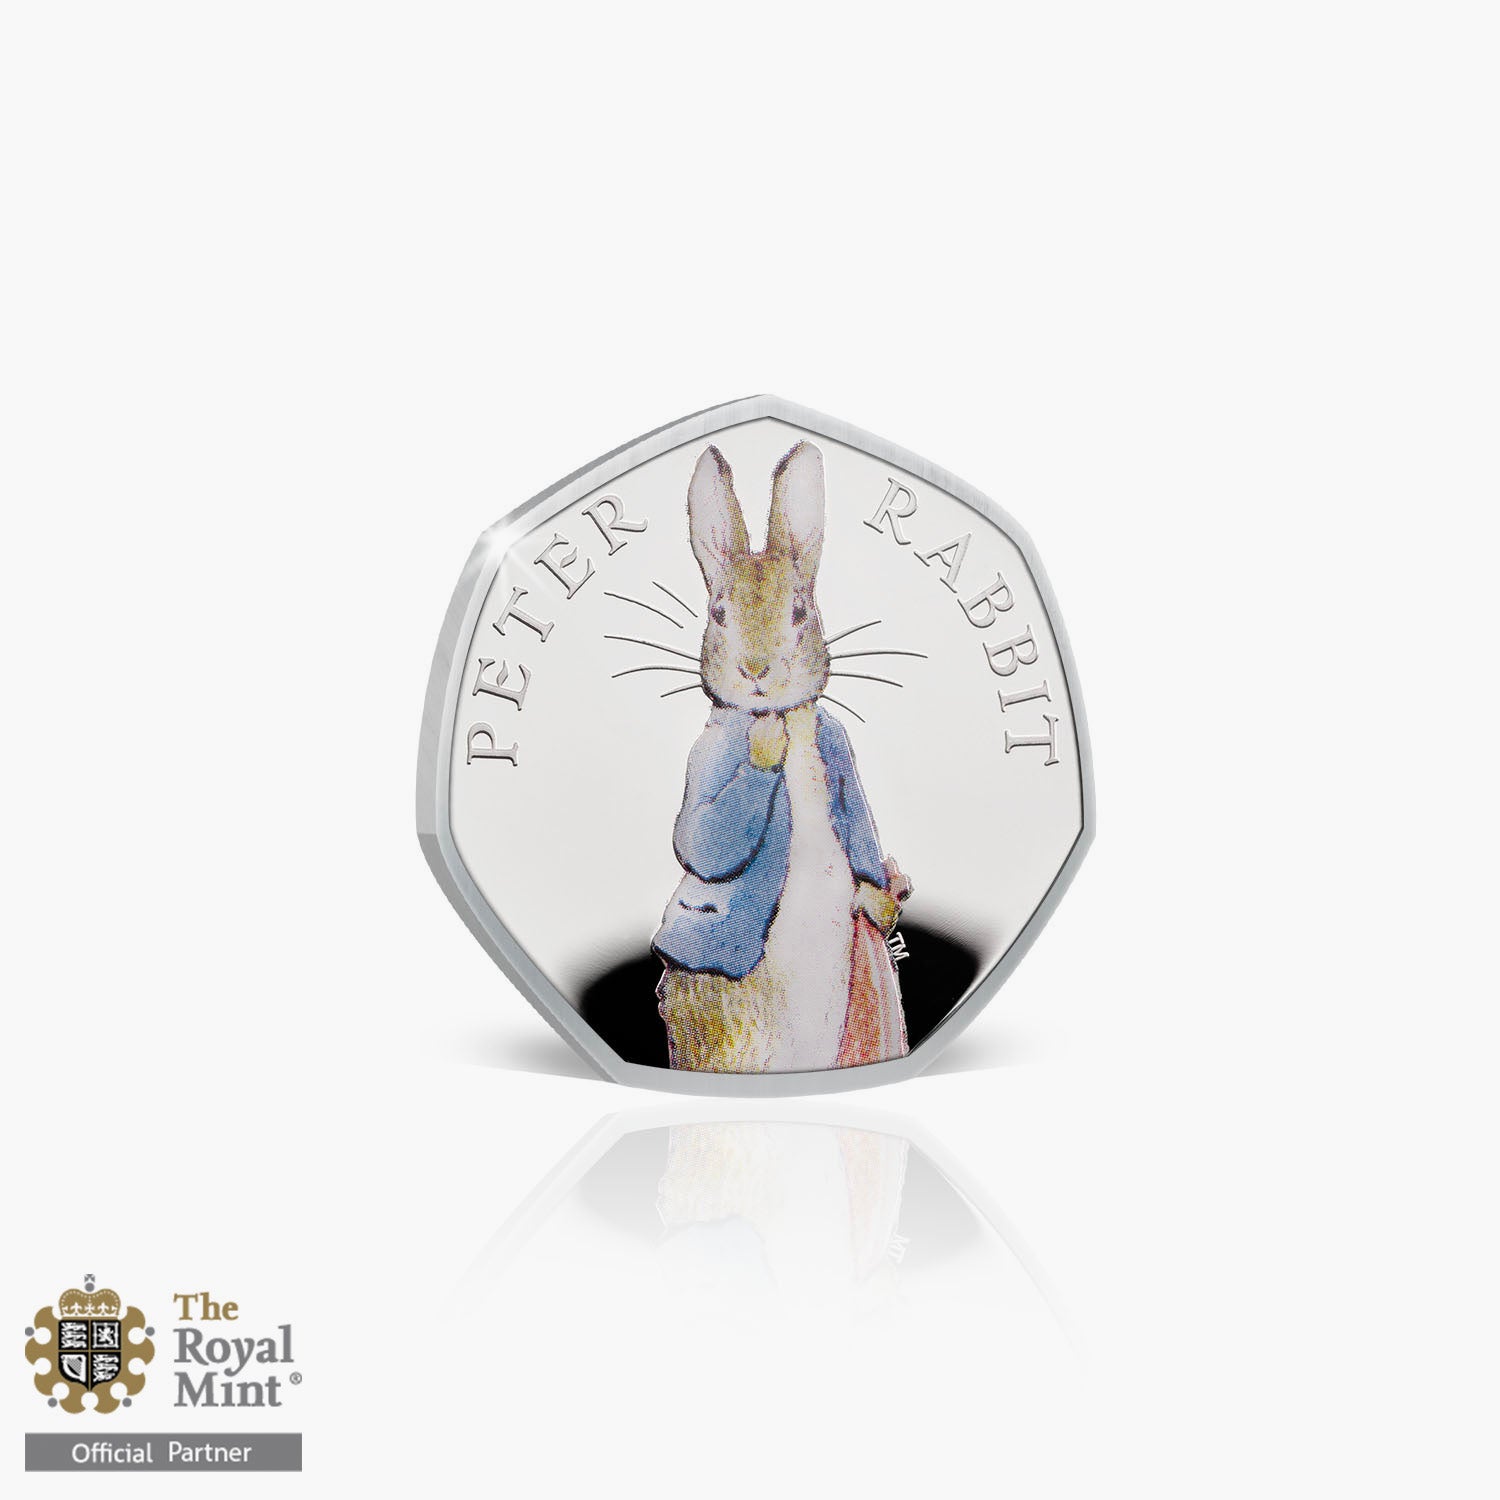 Peter Rabbit 2019 UK Silver Proof 50p Coin